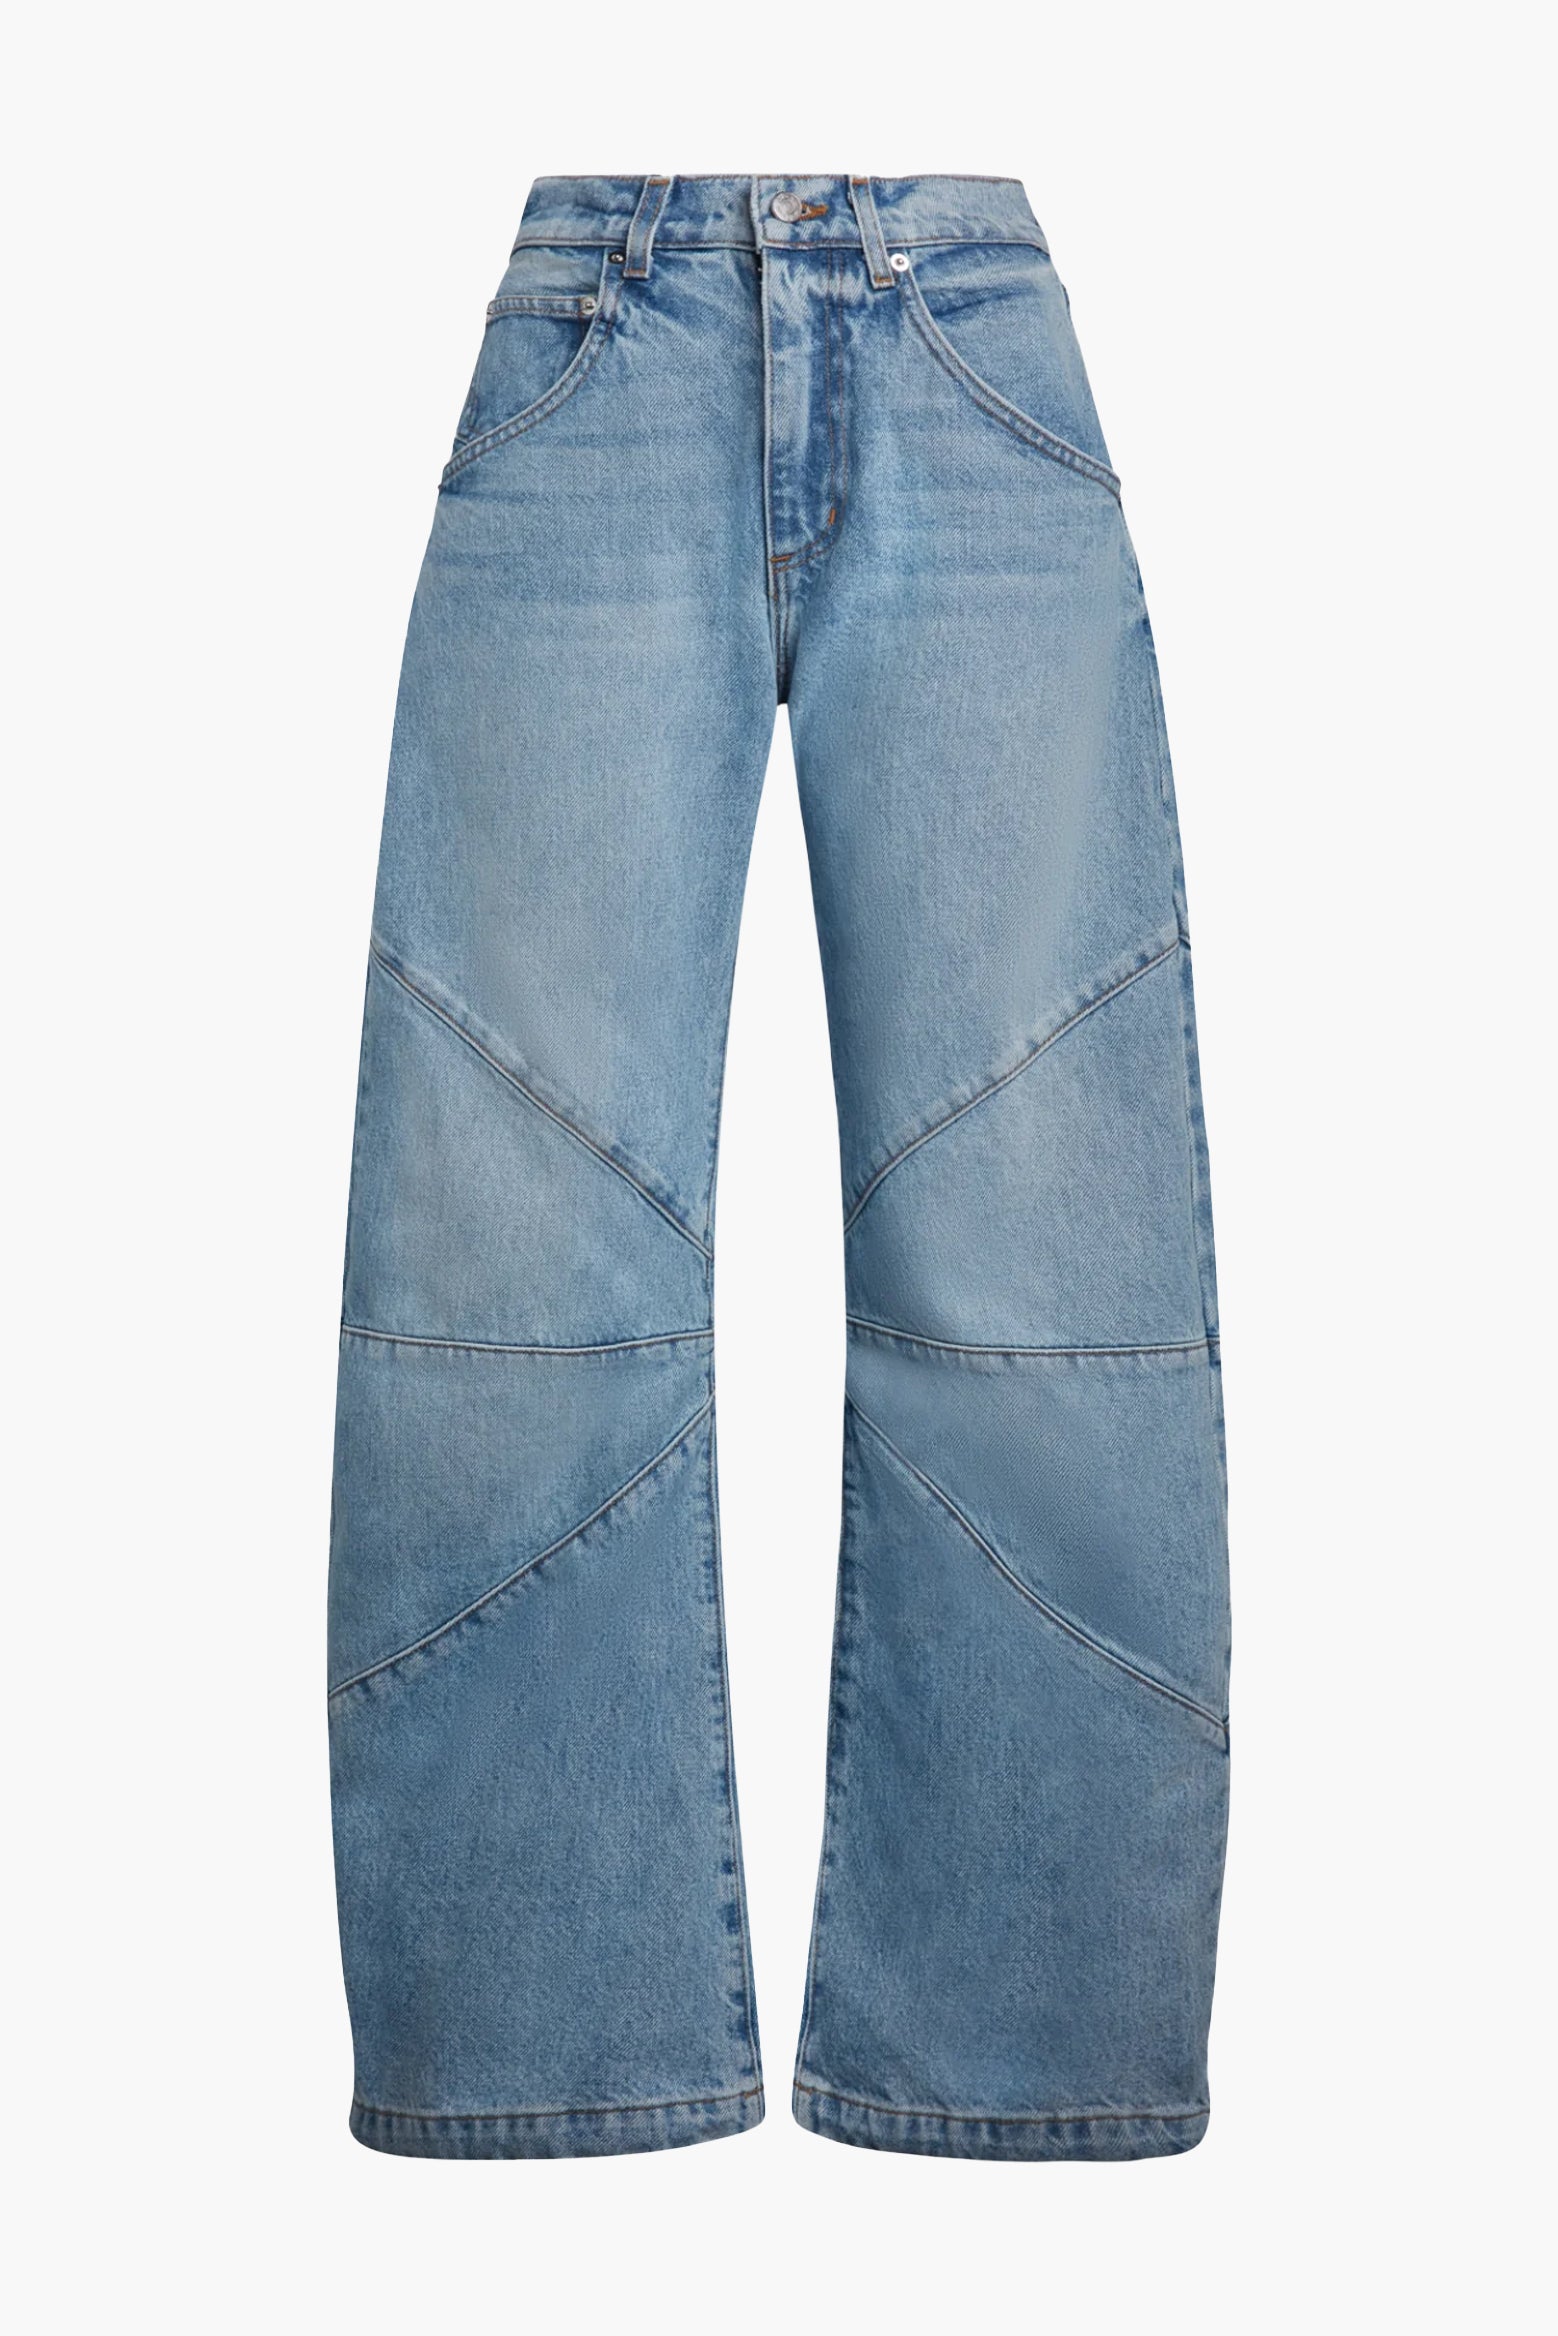 The EB Denim Frederic Jean in Luca available at The New Trend. 